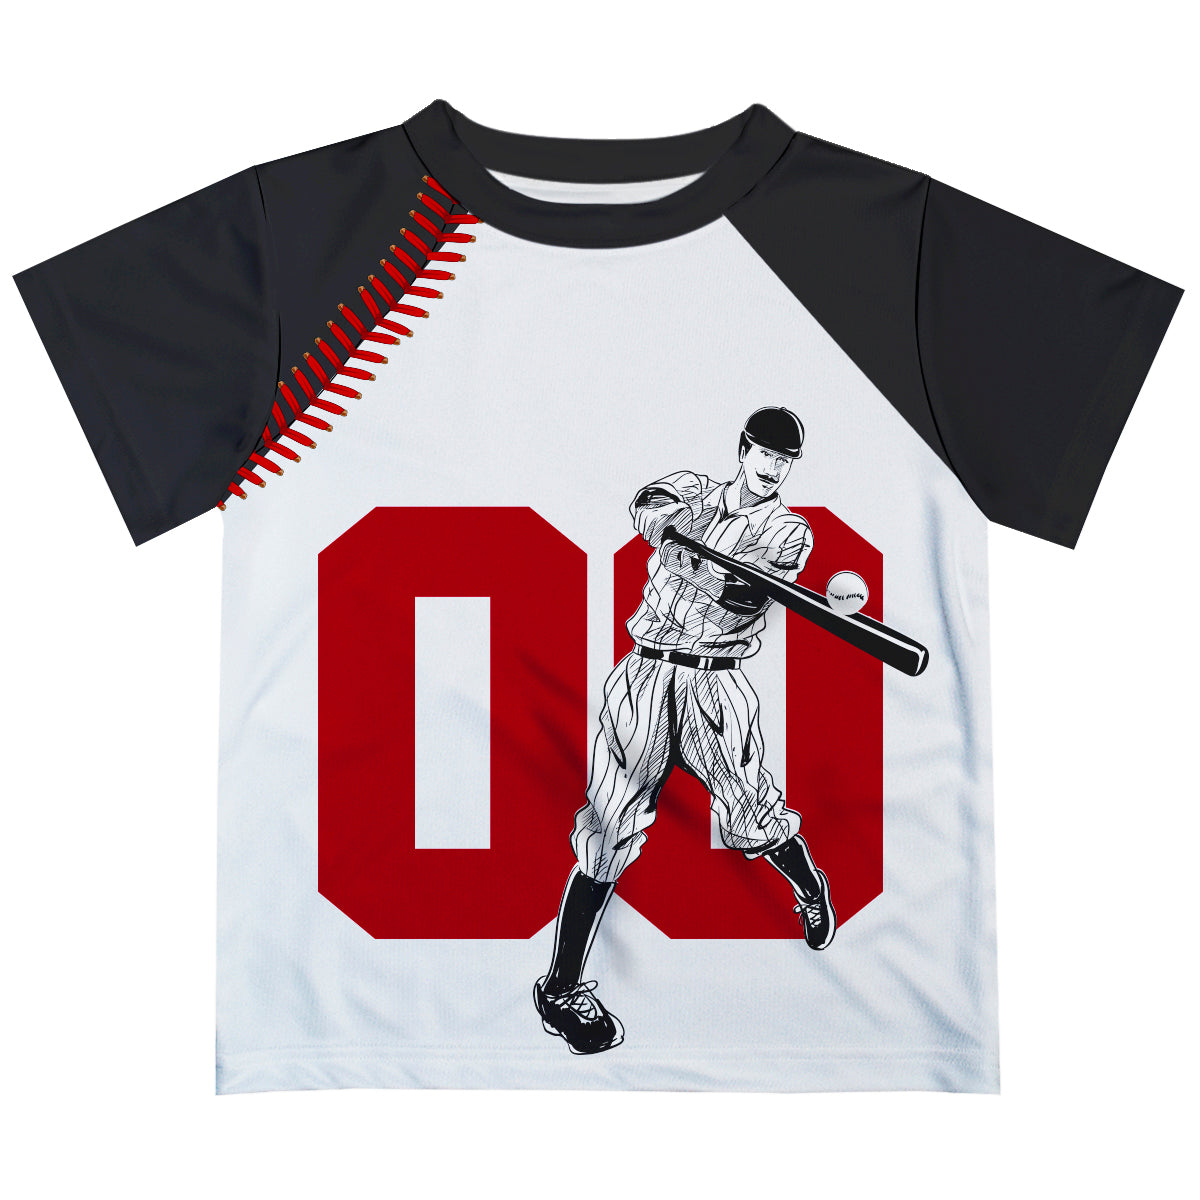 Baseball Player Personalized Number White and Black Short Sleeve Tee Shirt